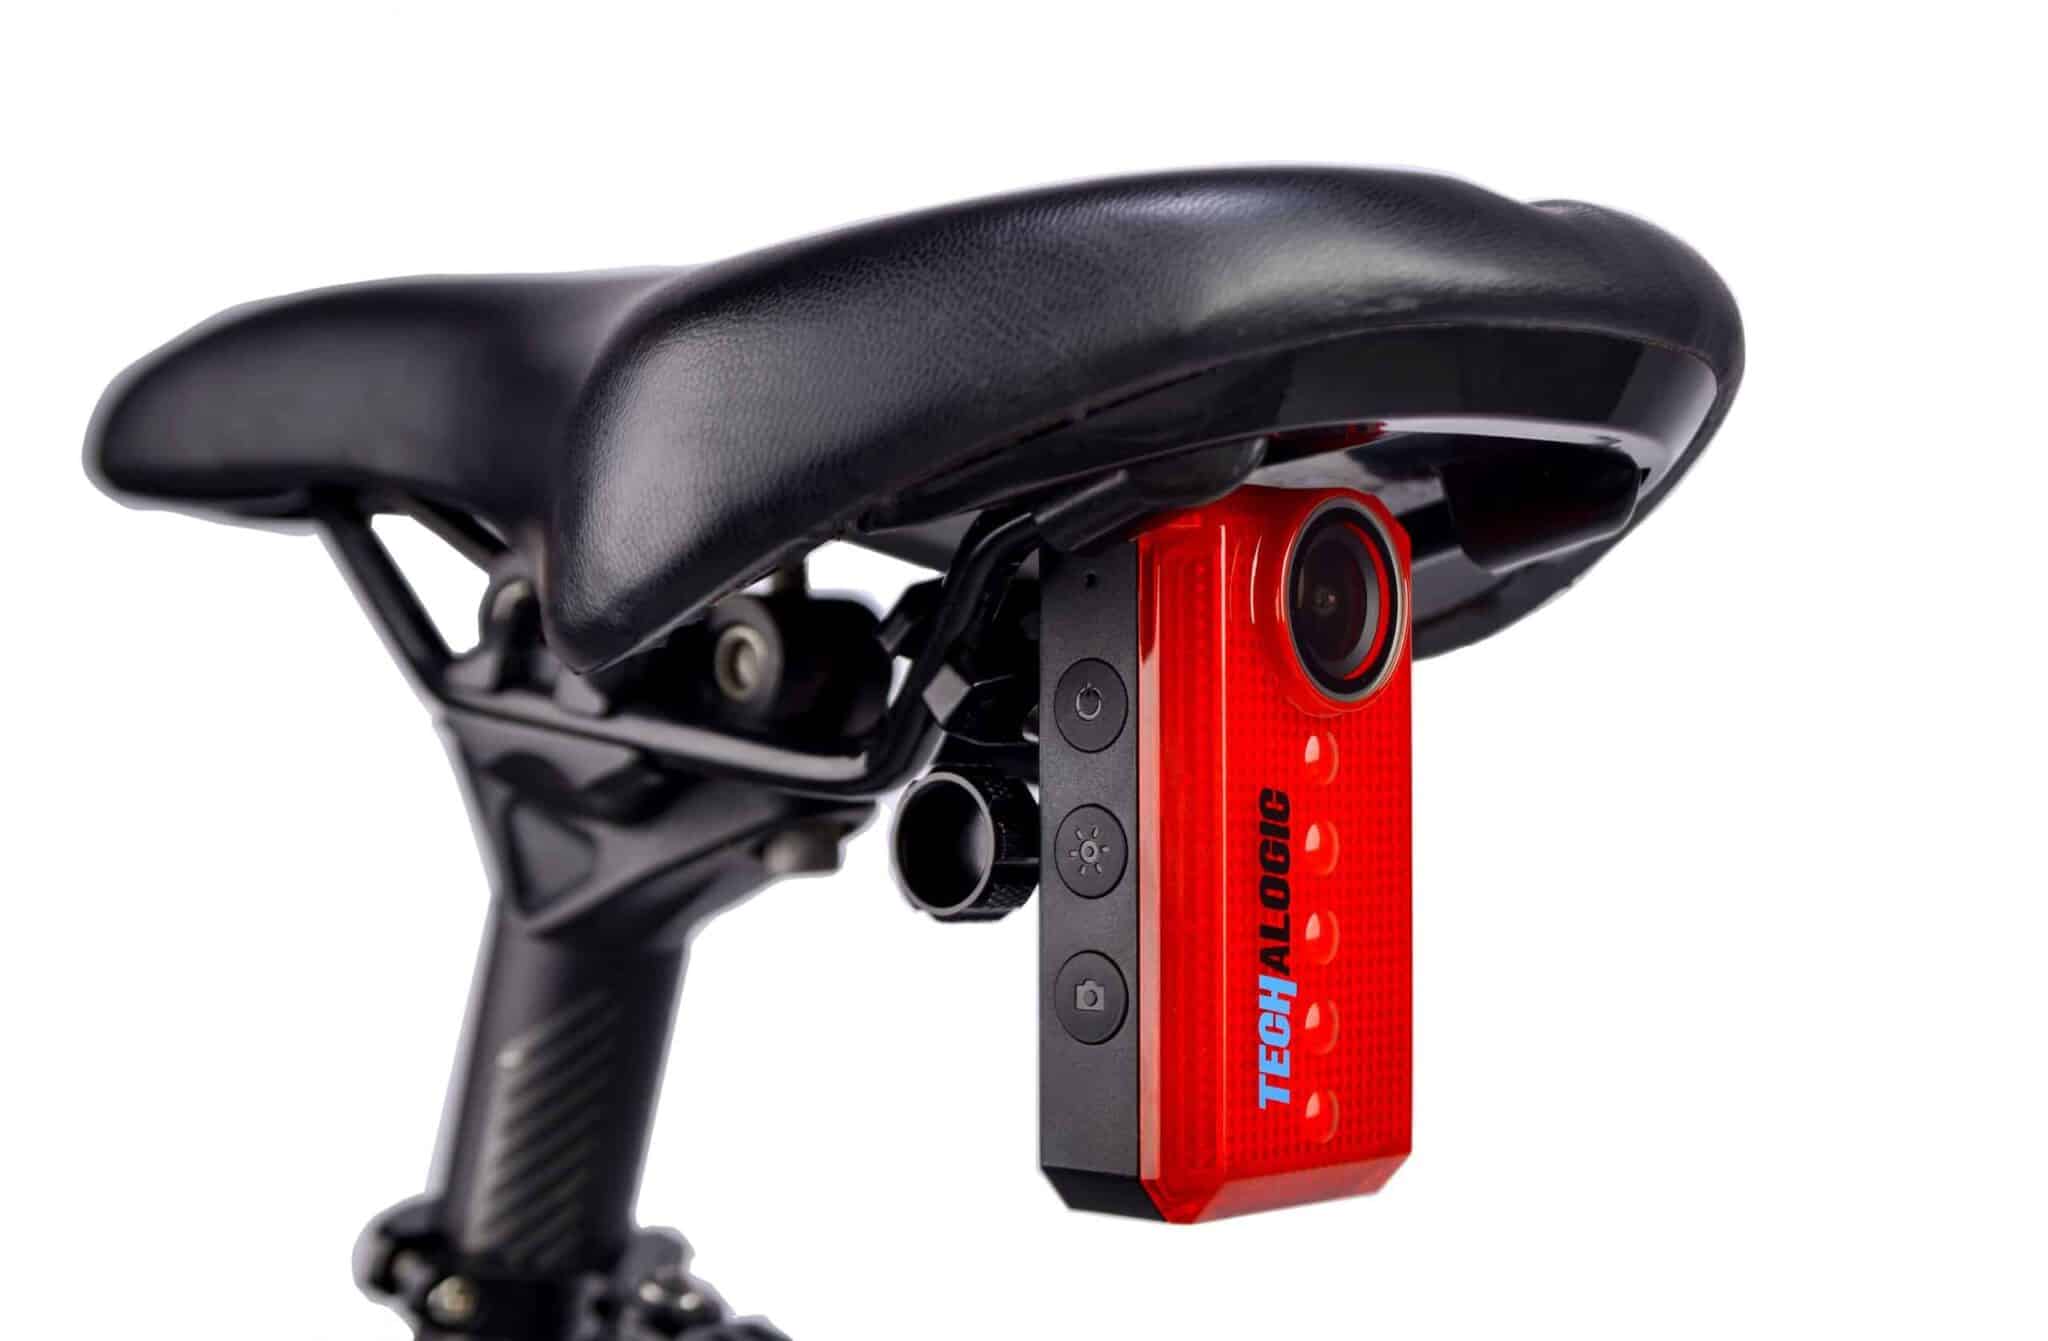 Techalogic CR-1 Rear Light and Camera review